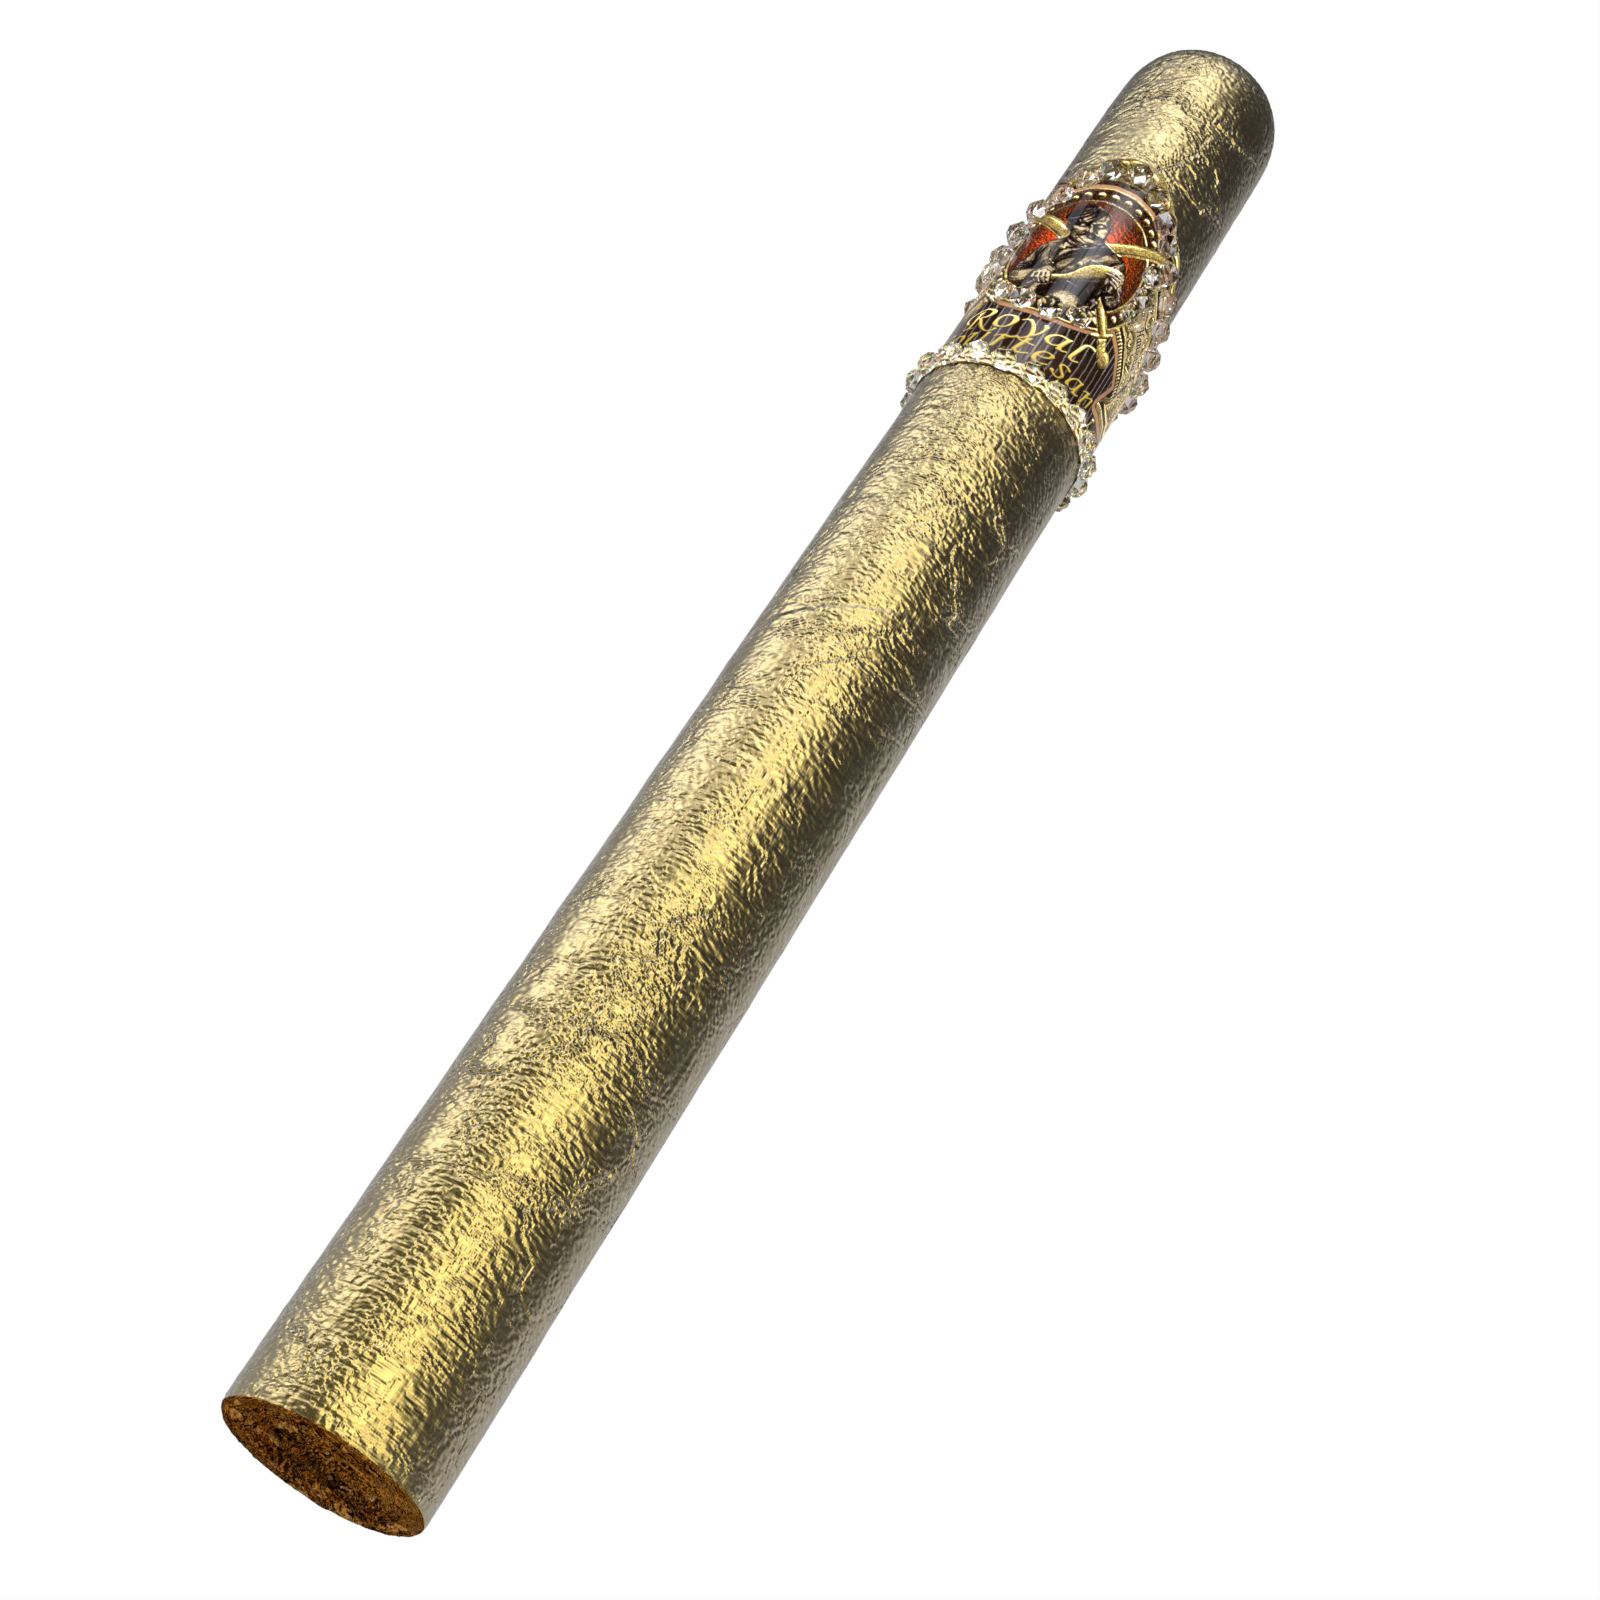 The most expensive cigar in the world